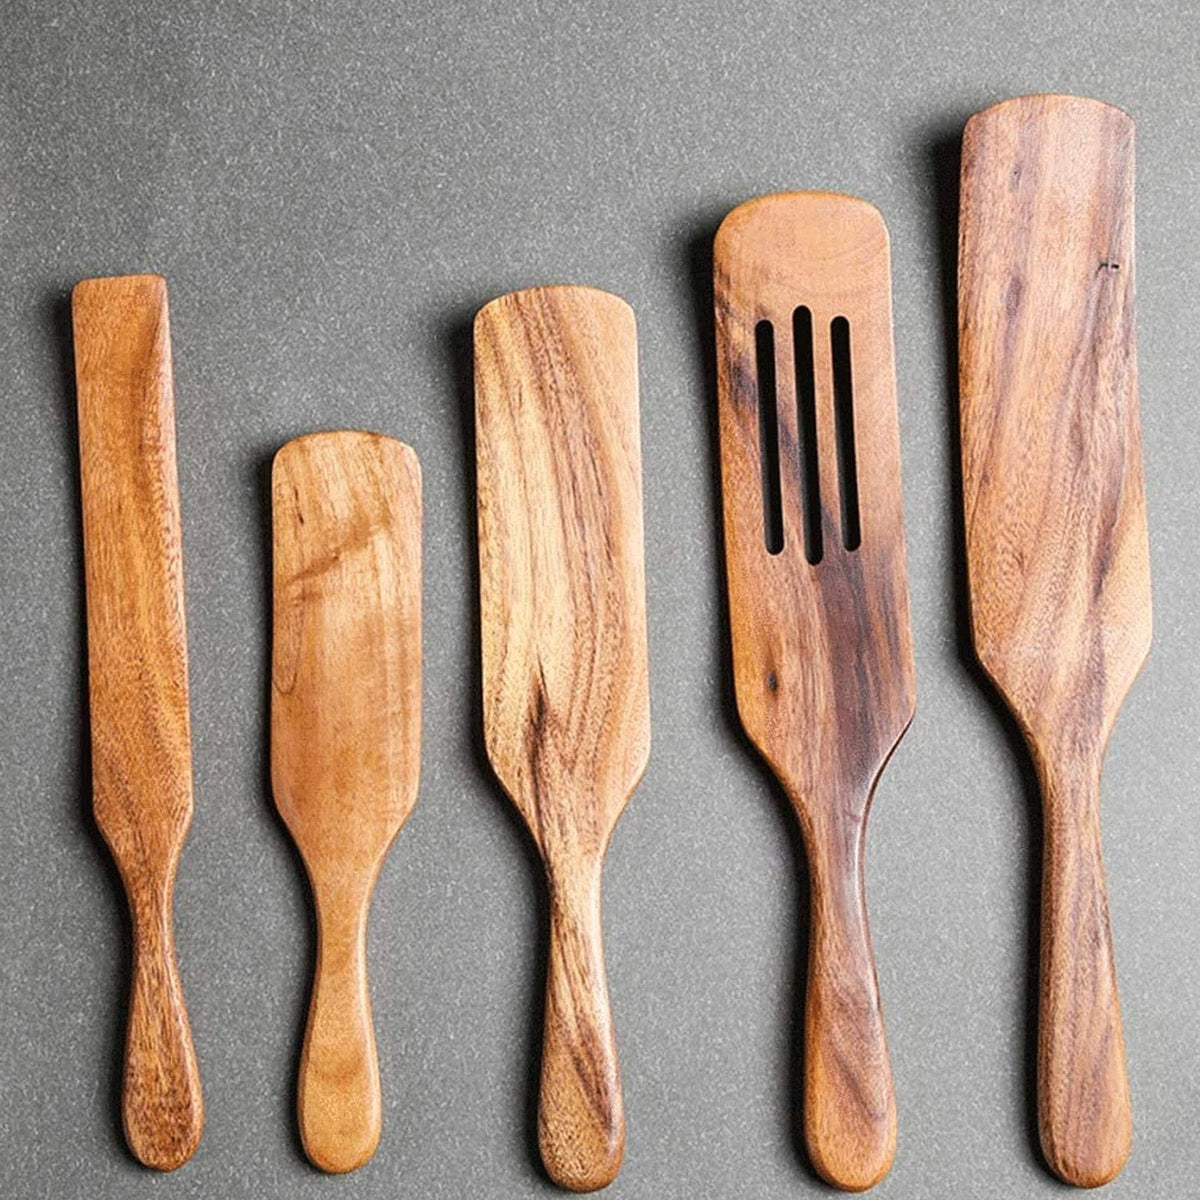 Wooden Spurtle Set Of 5 For Cooking, Acacia Wood Utensils For